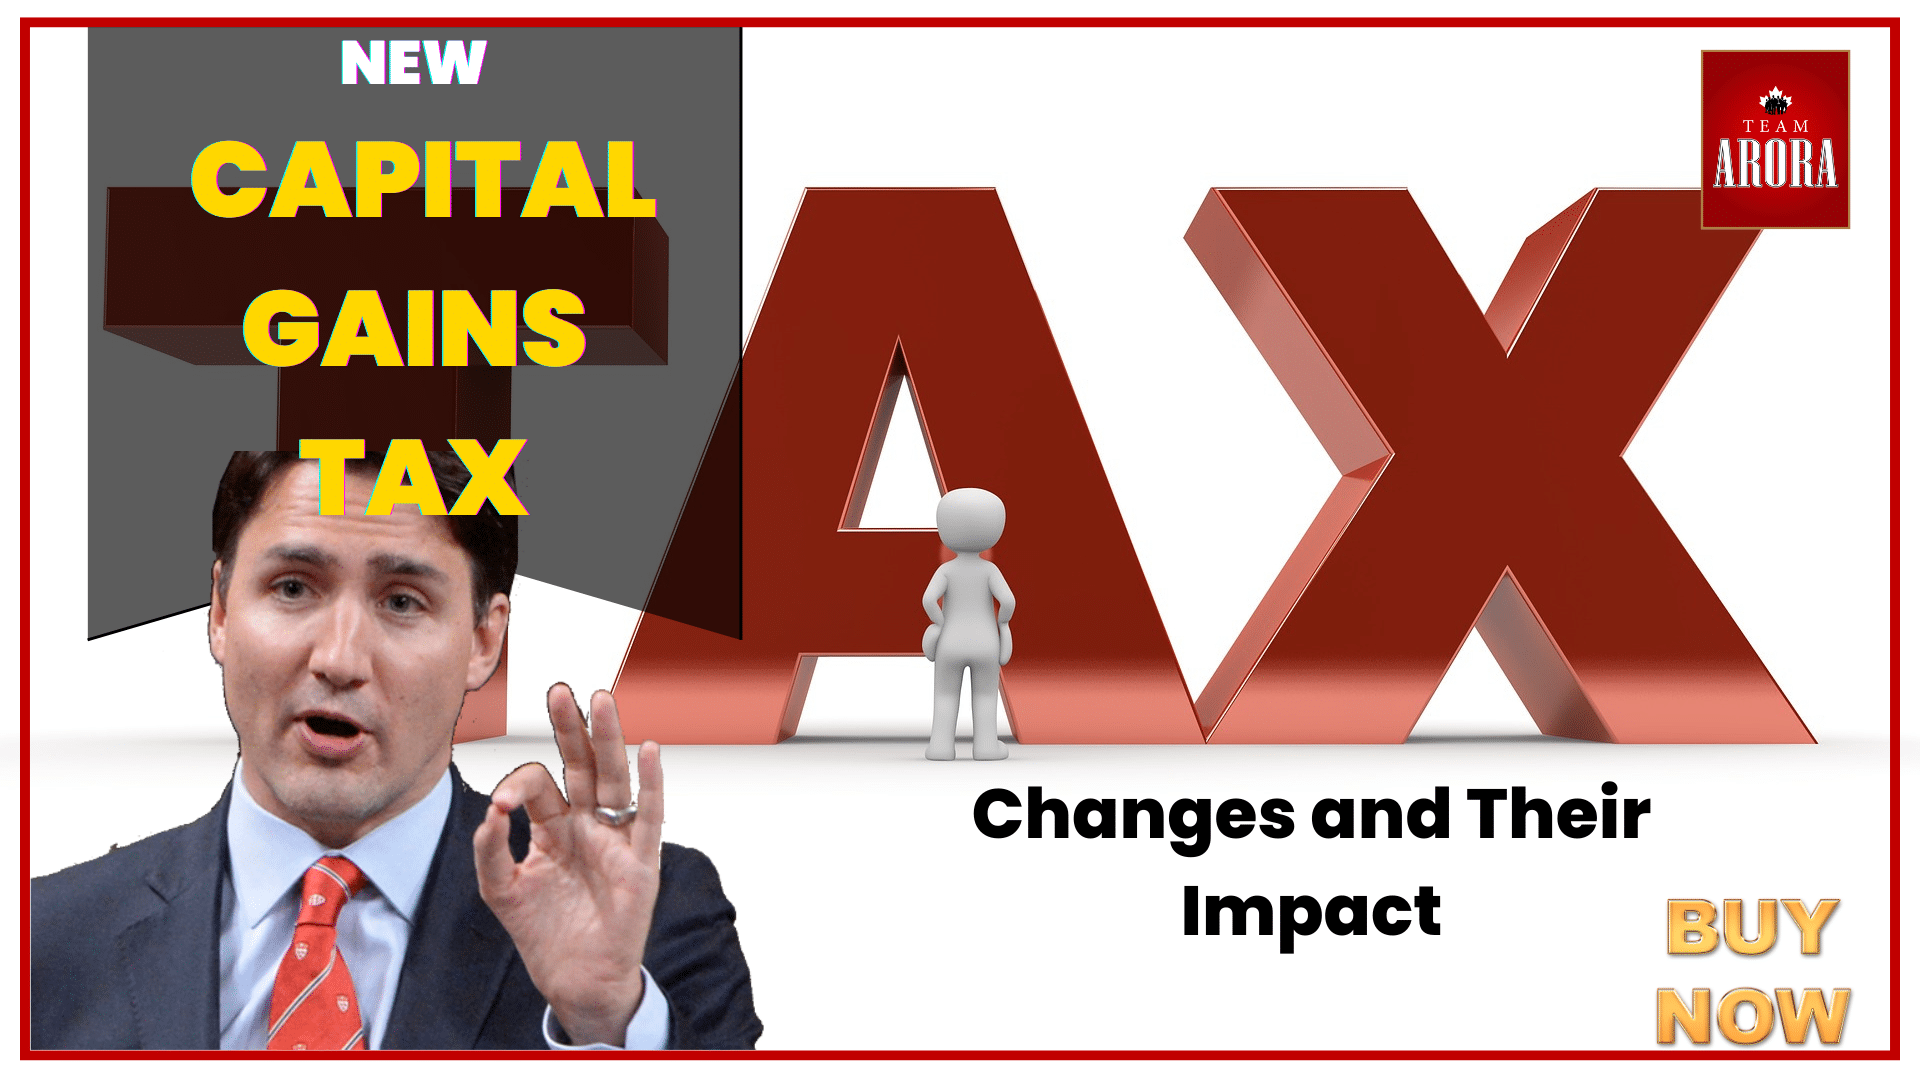 Canada’s New Capital Gains Tax Changes and Their Impact